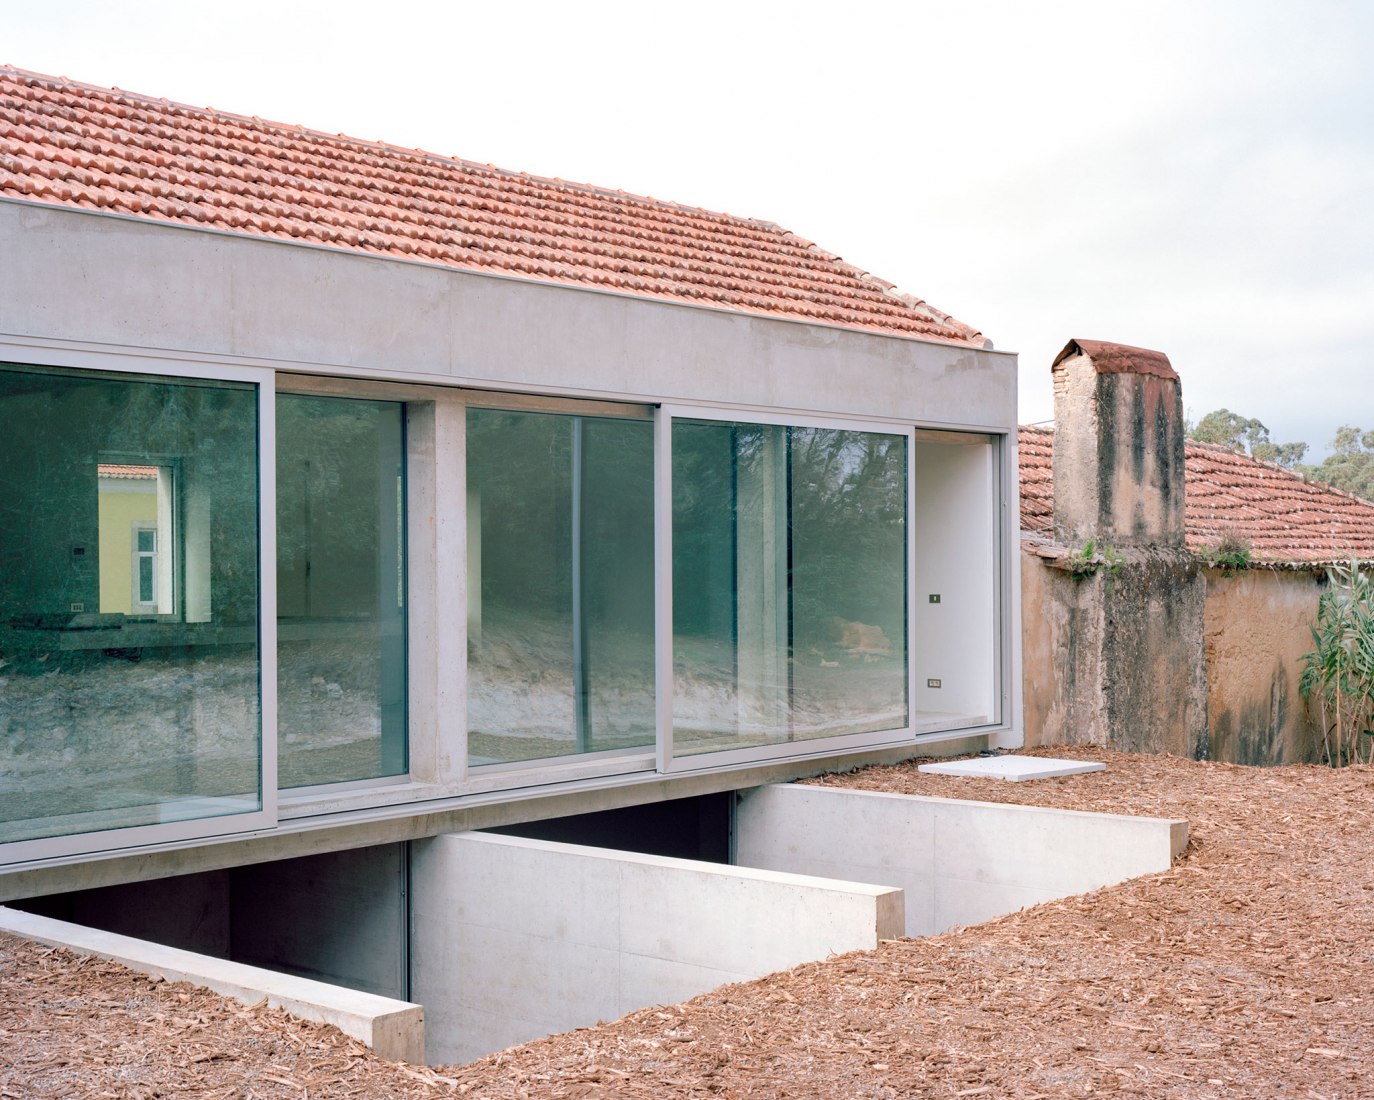 Bringing back to life an old business. Tenant House by Arquitectura-G. Photograph by Maxime Delvaux.